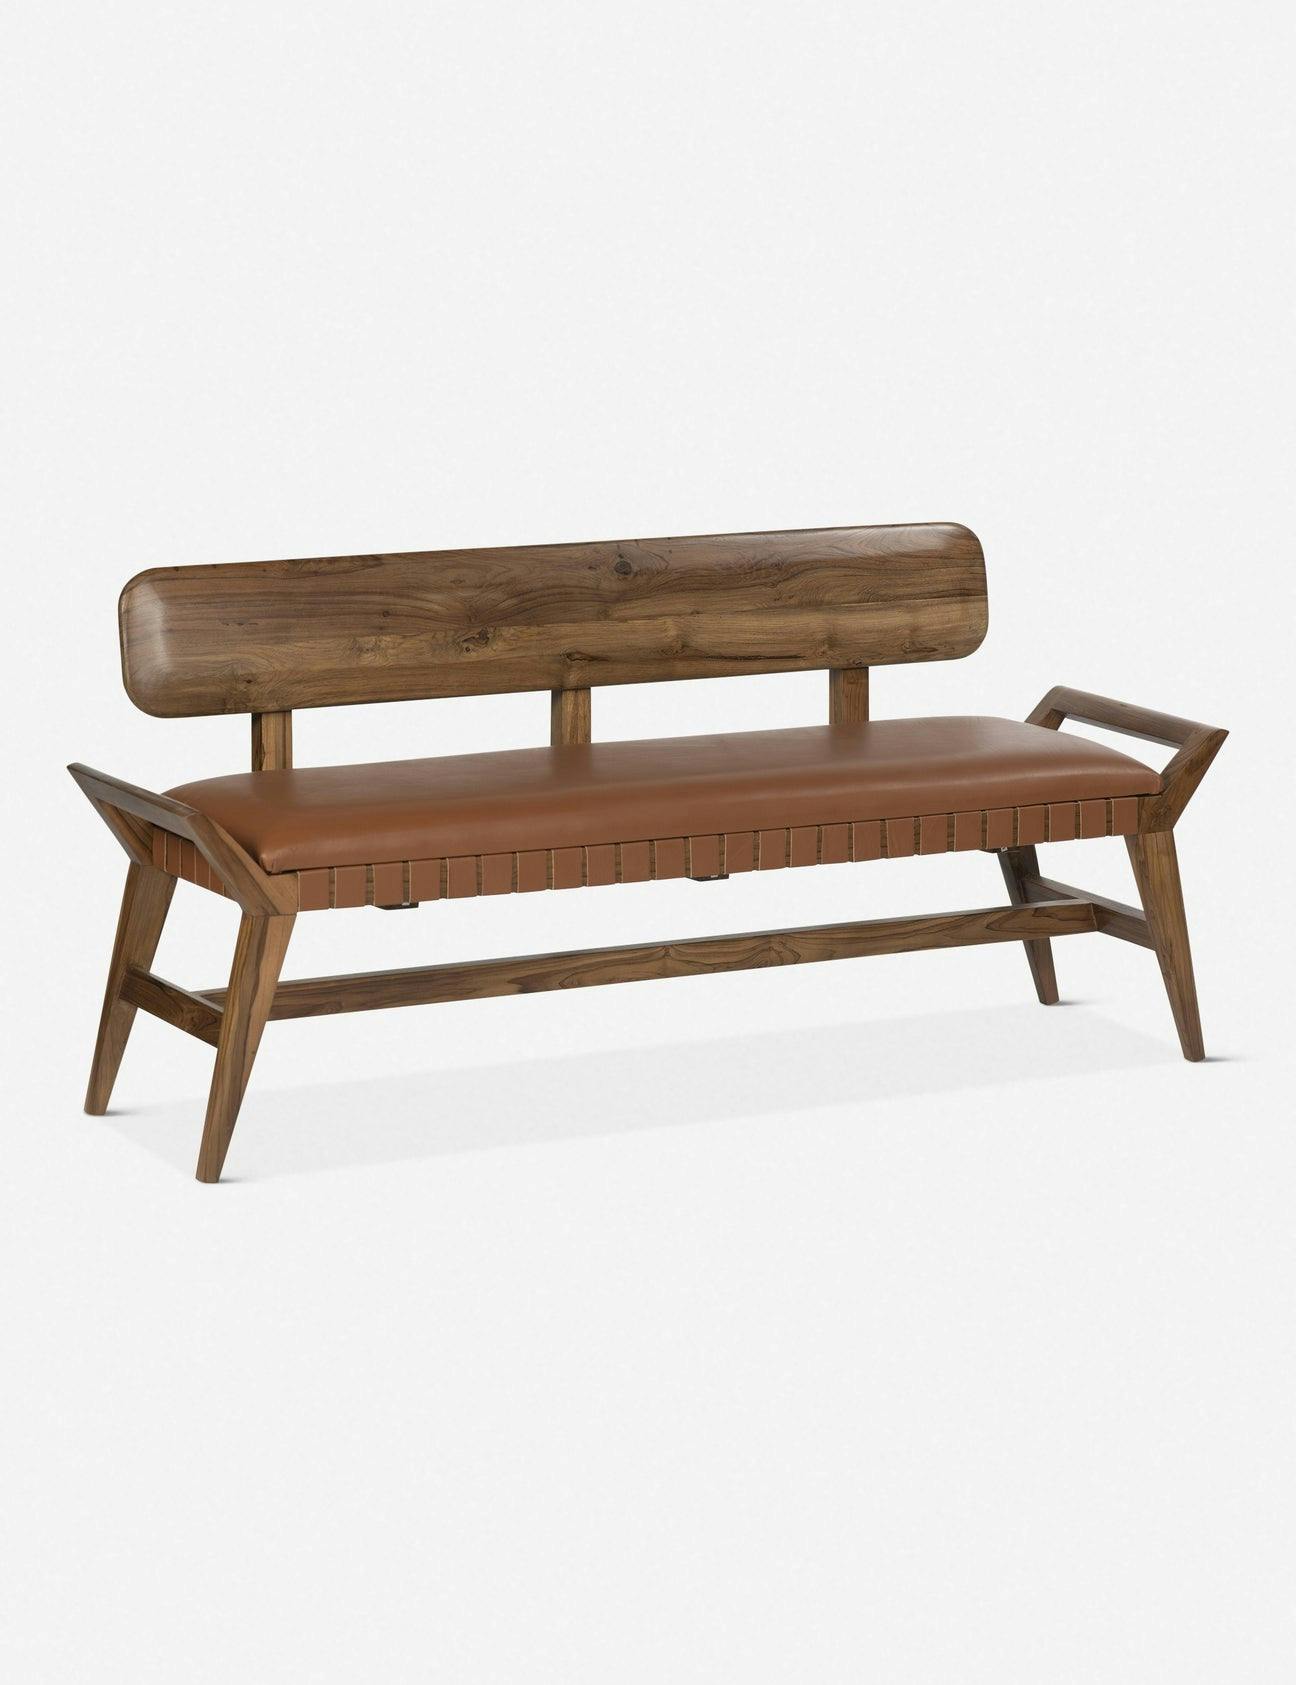 Sienna Leather Bench